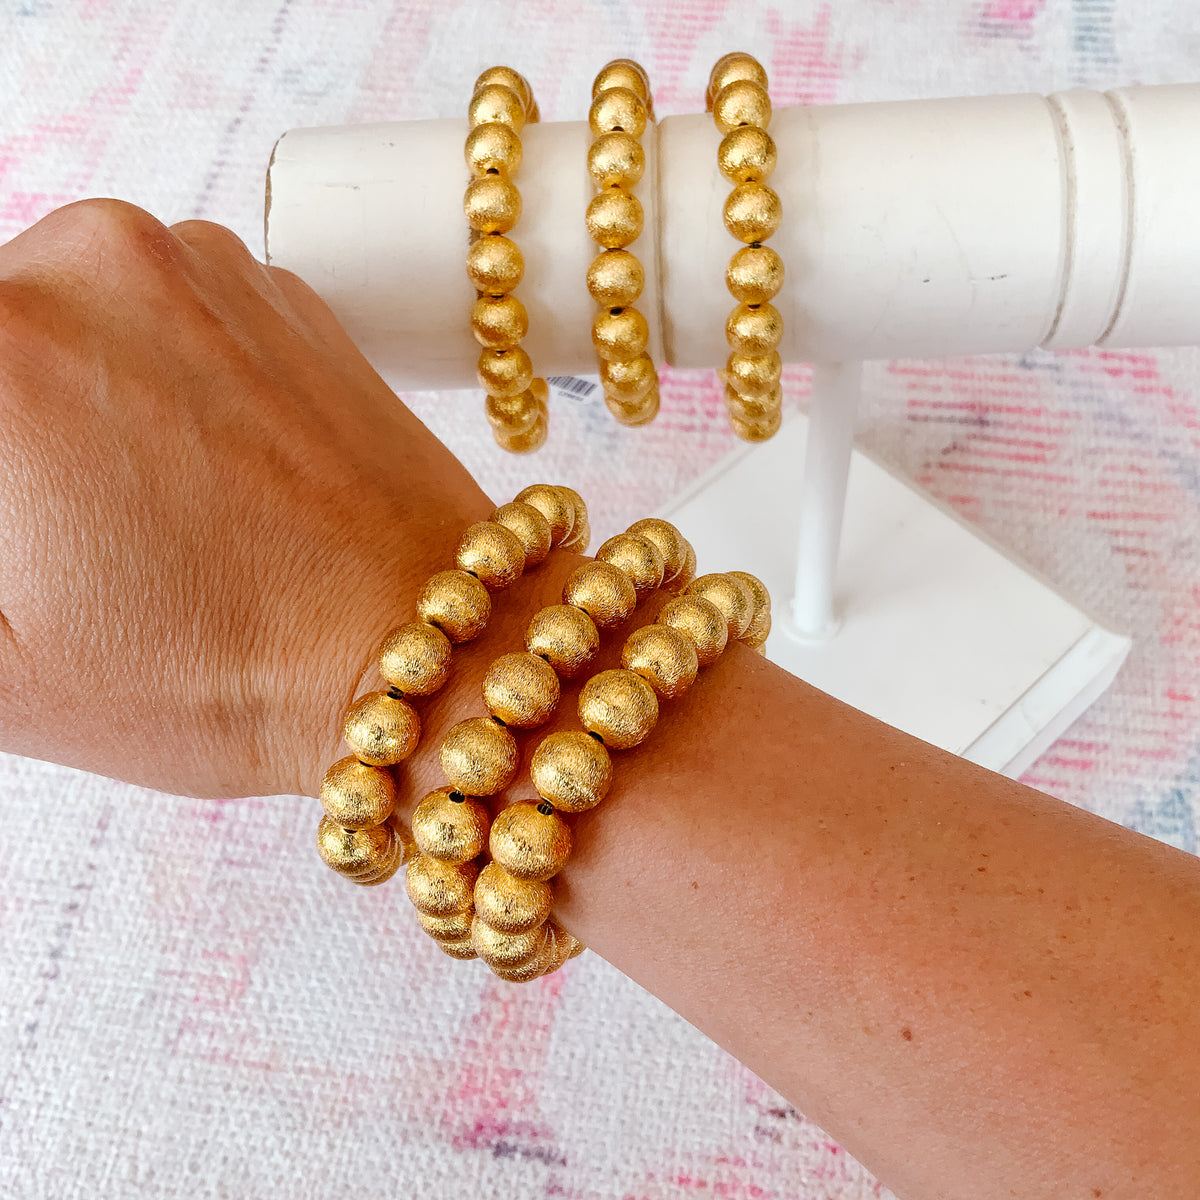 Handmade Gold Faux Pearl Bracelet | Asian Boutique Jewelry from New York |  Yun Boutique